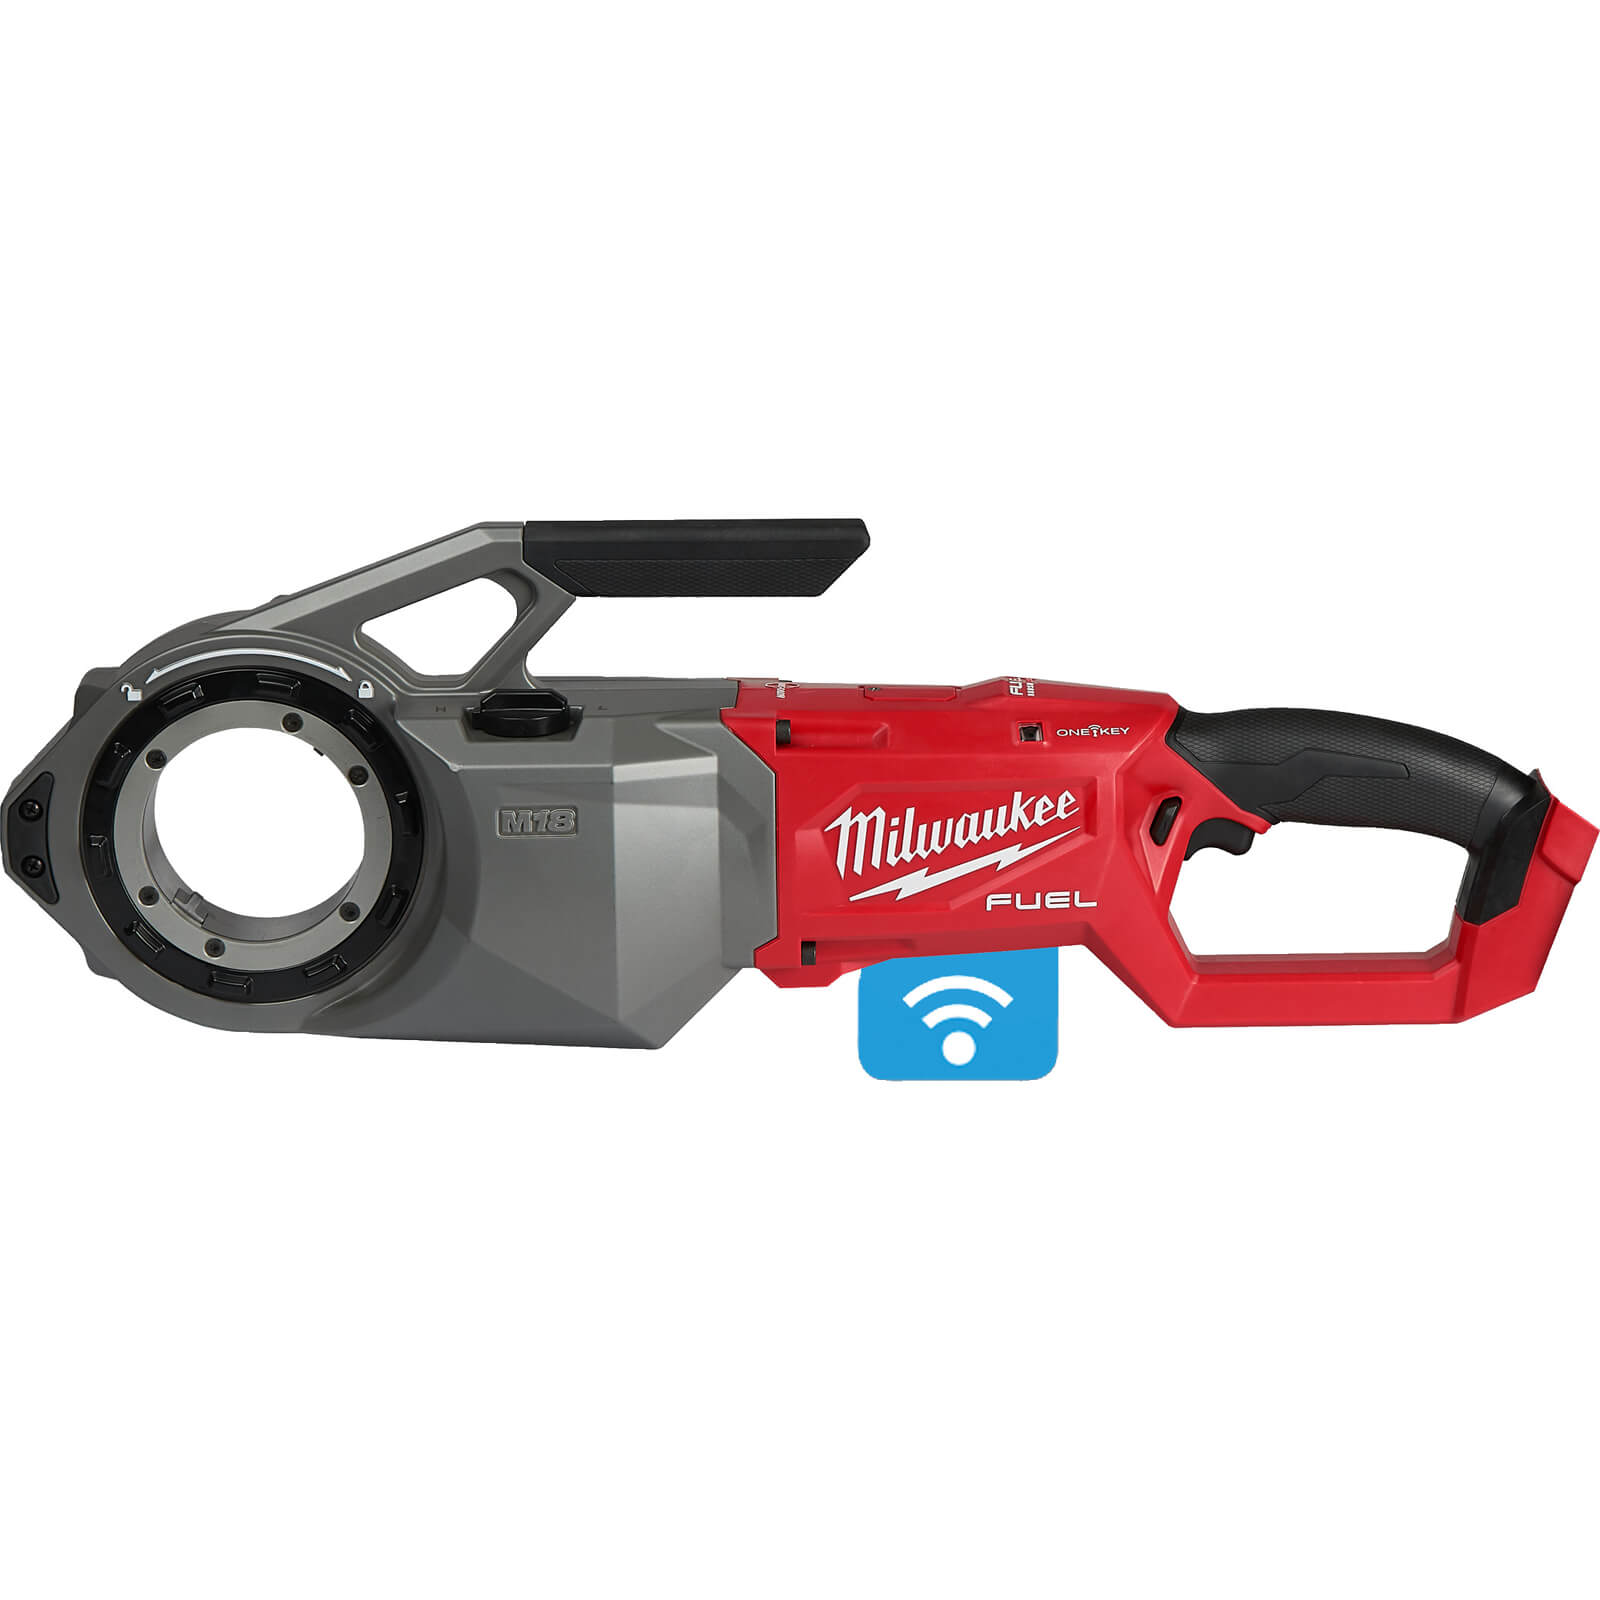 Image of Milwaukee M18 FPT2 Fuel 18v Cordless Brushless Pipe Threader No Batteries No Charger Case